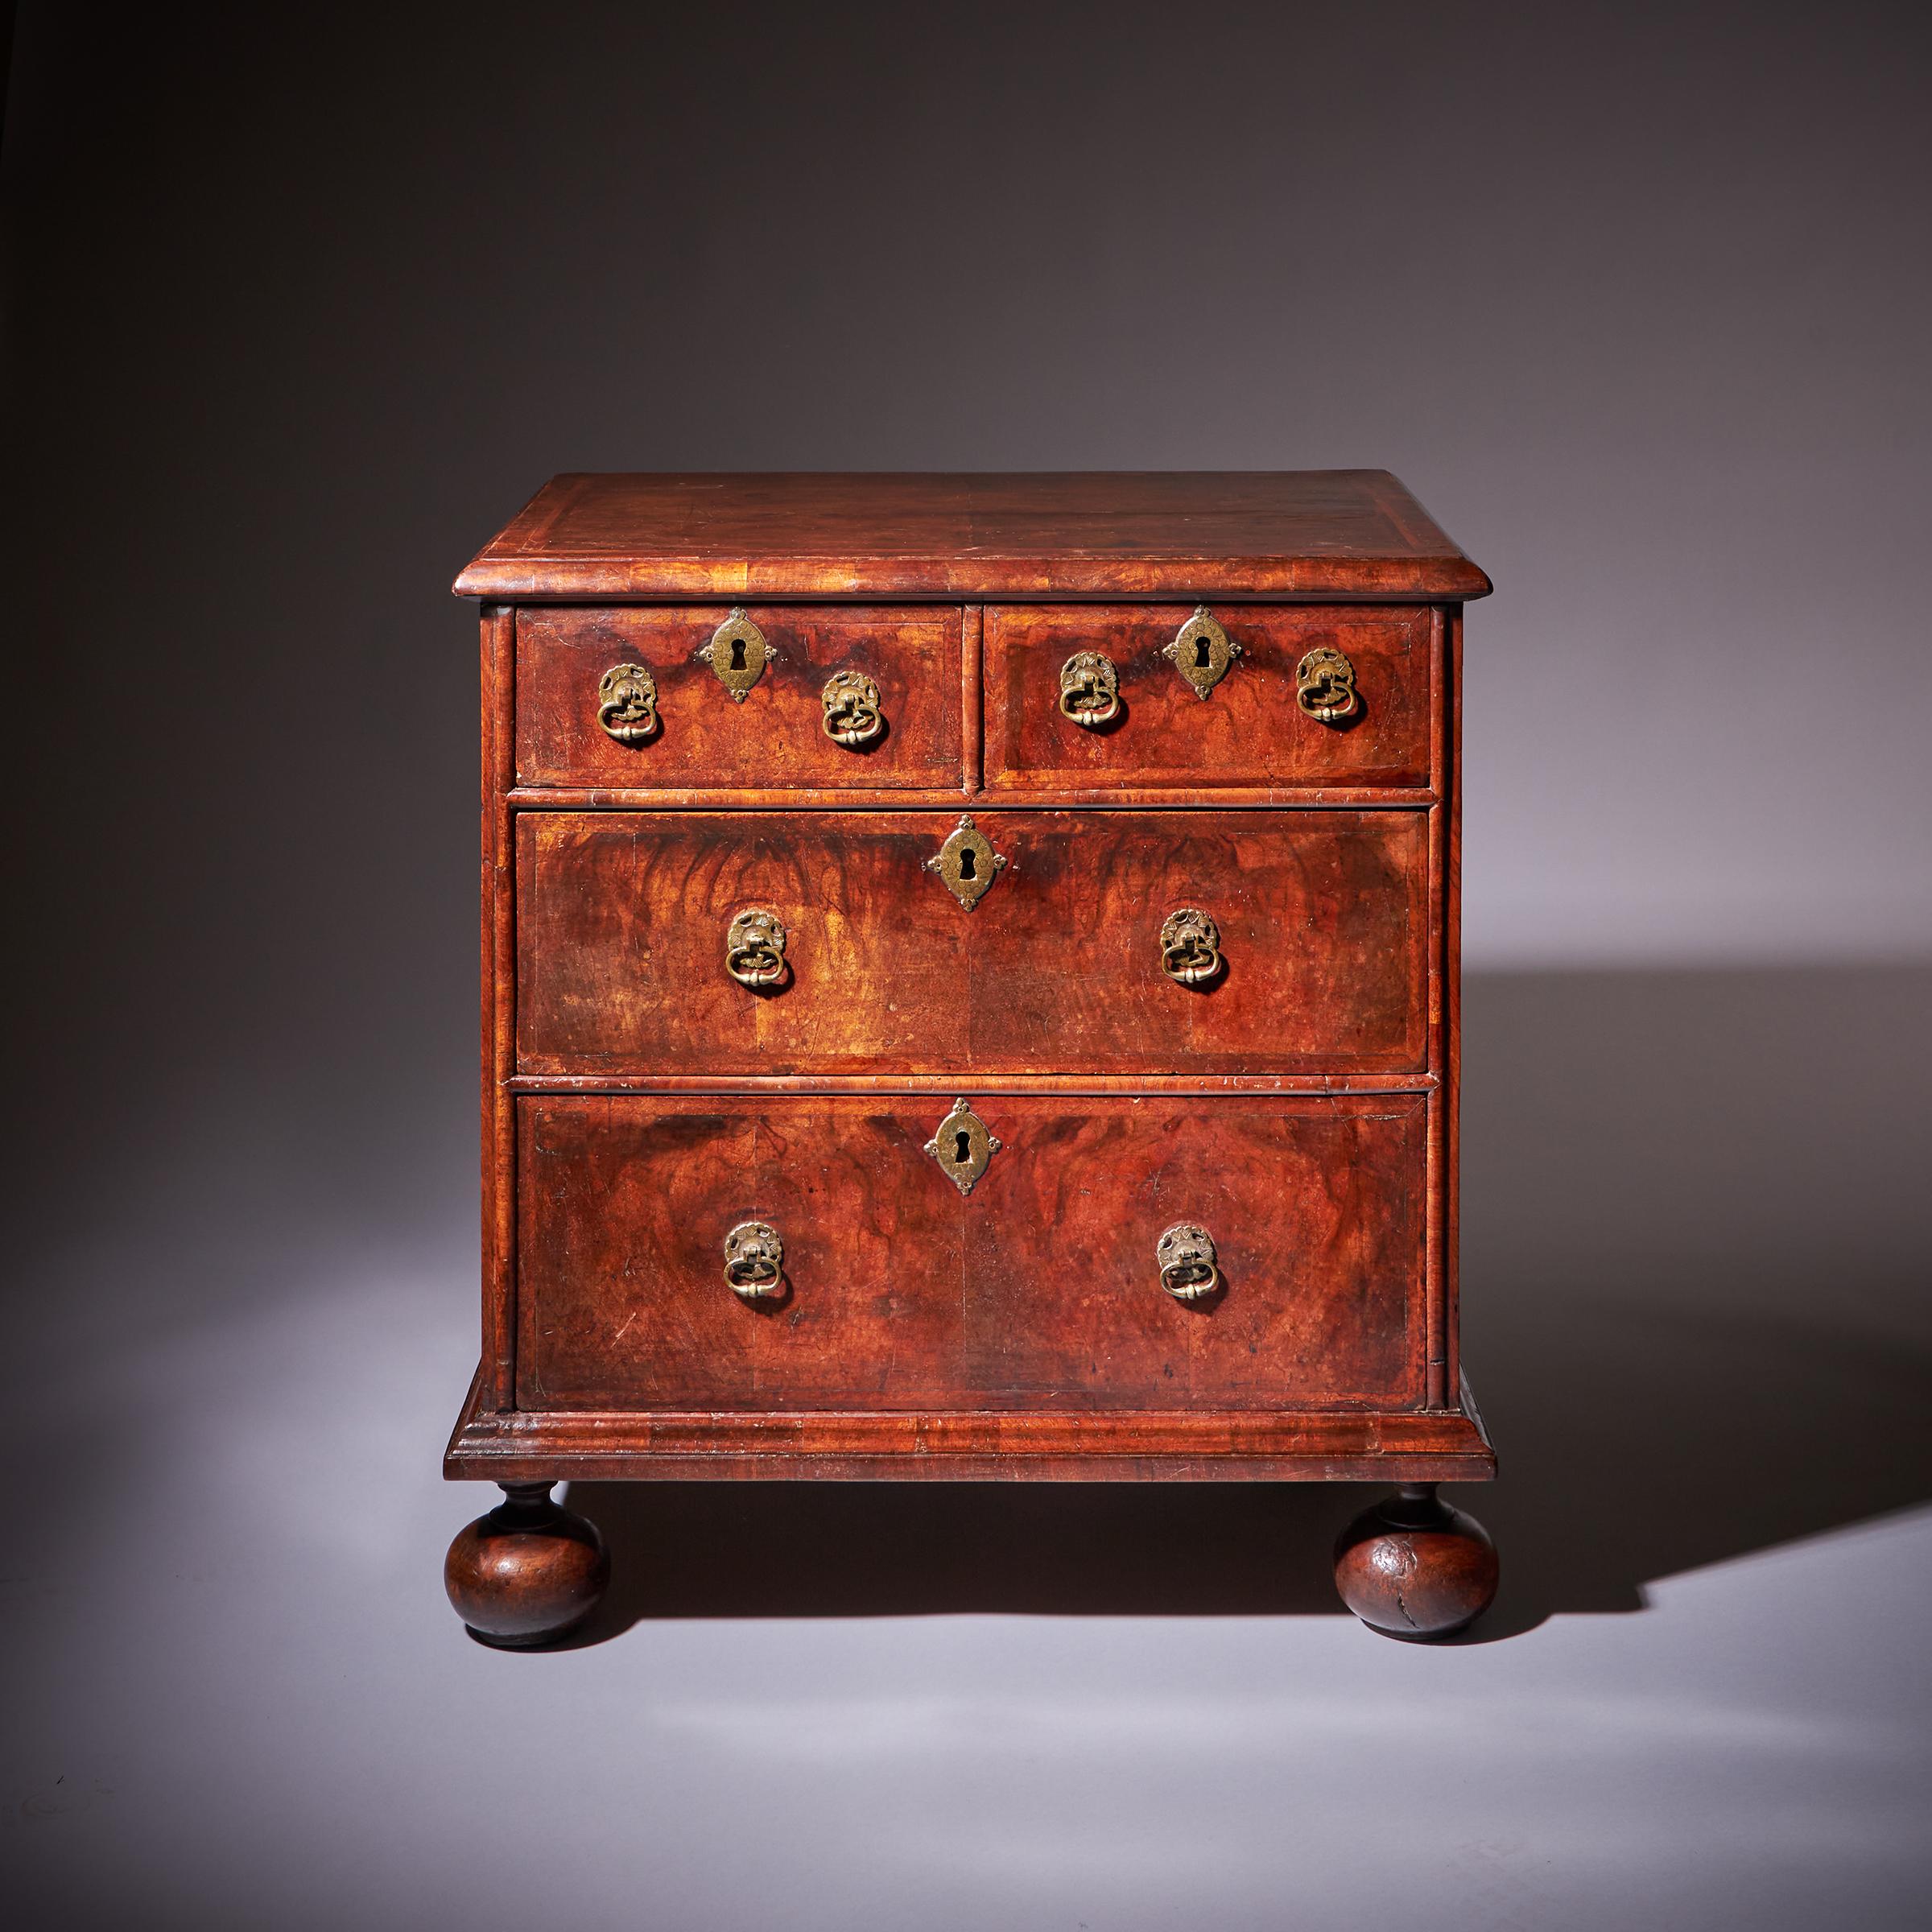 A Small and Rare William and Marry Figured Walnut Chest of Drawers Circa 1690-1